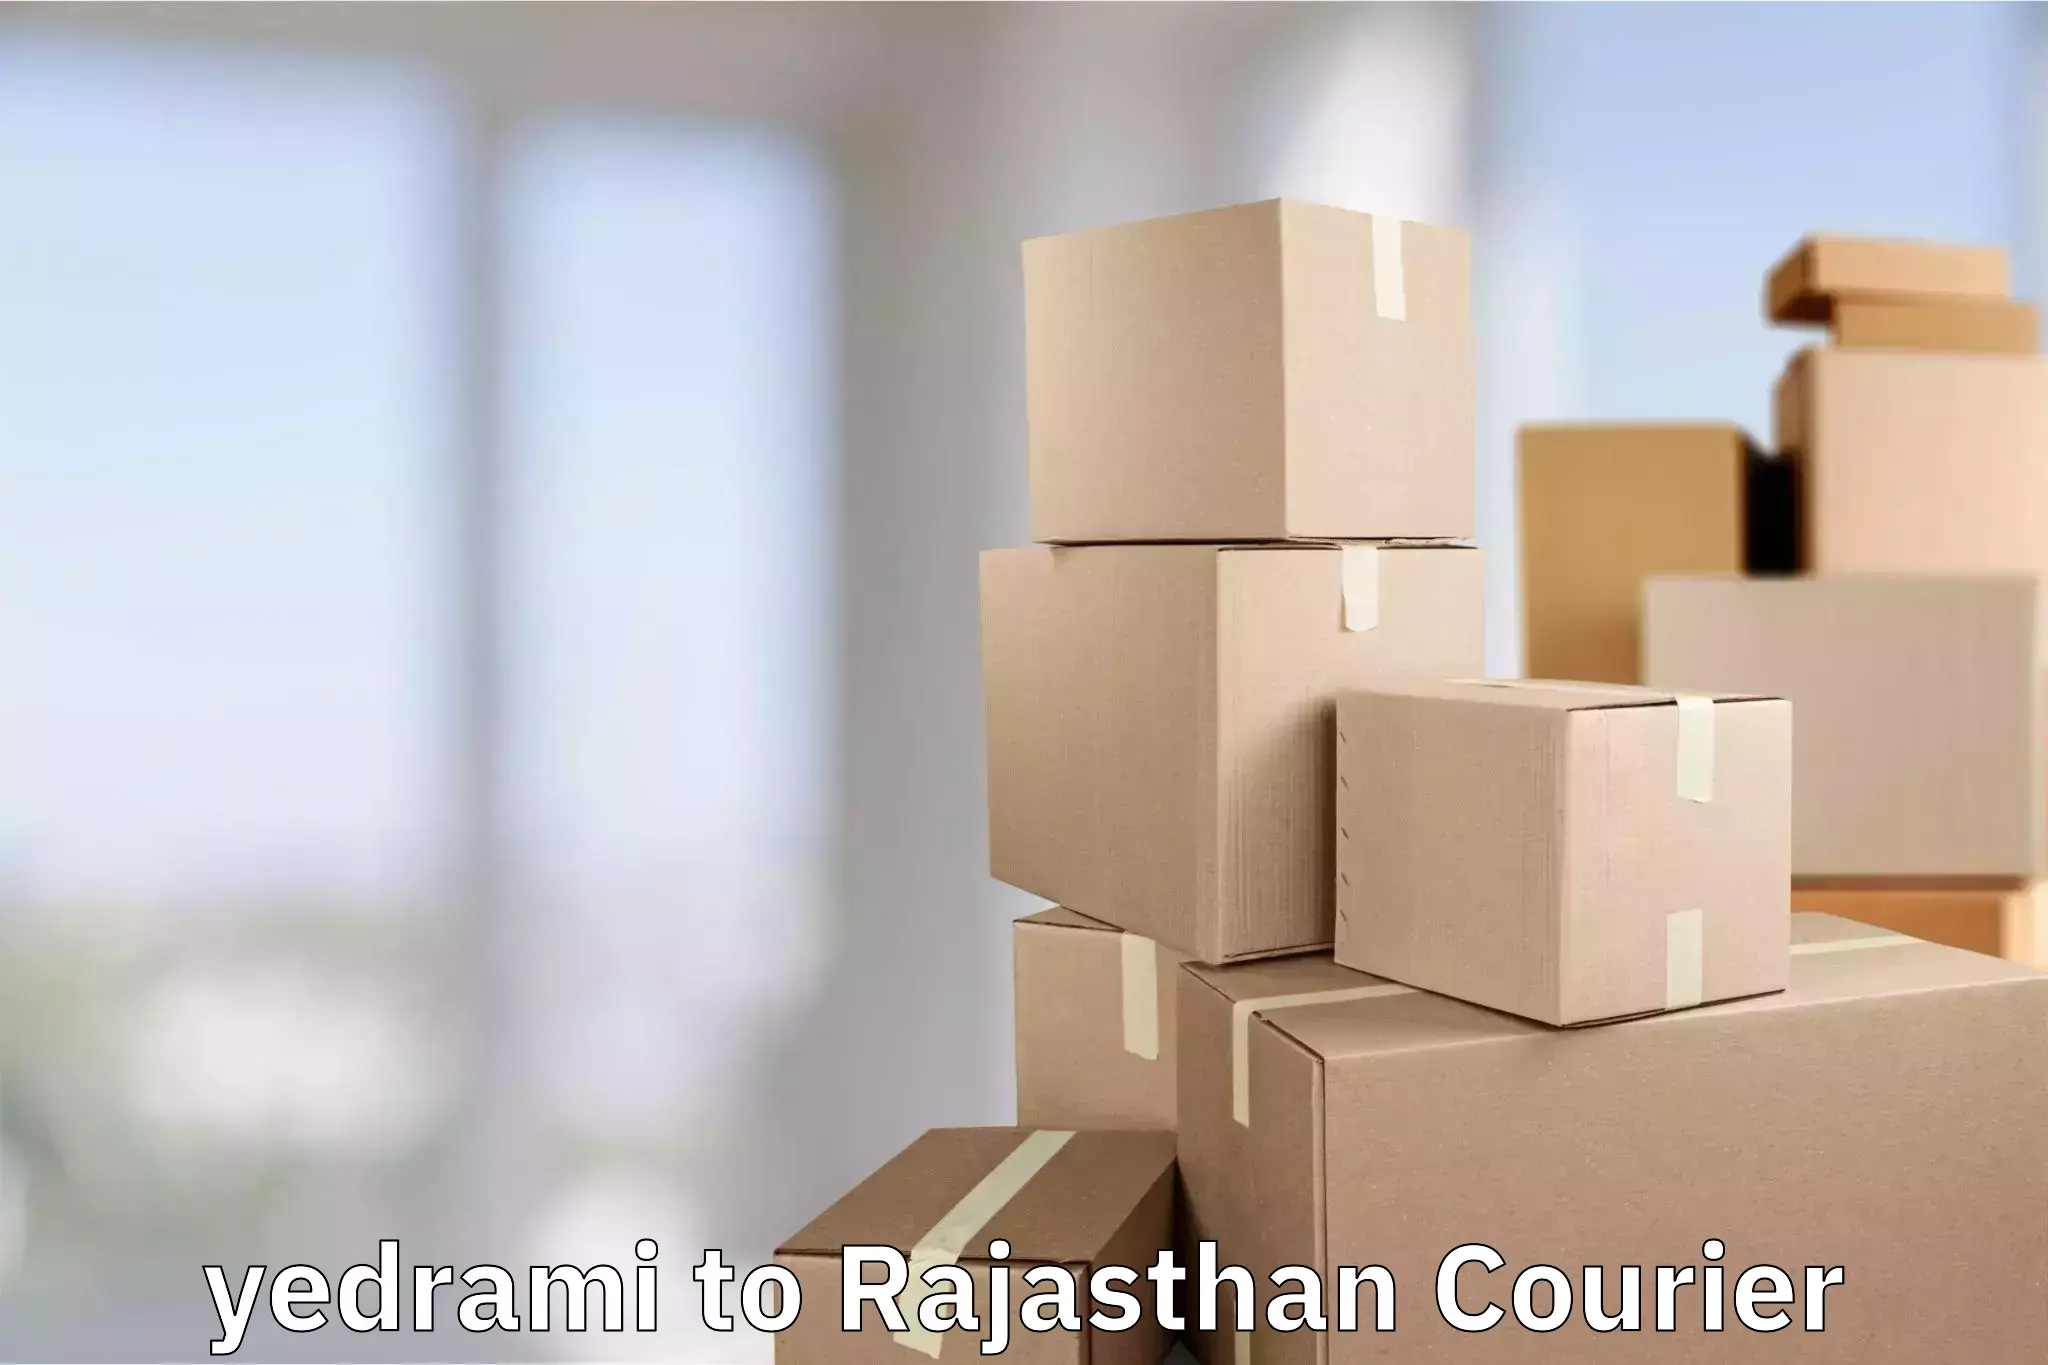 Reliable luggage courier yedrami to Alwar